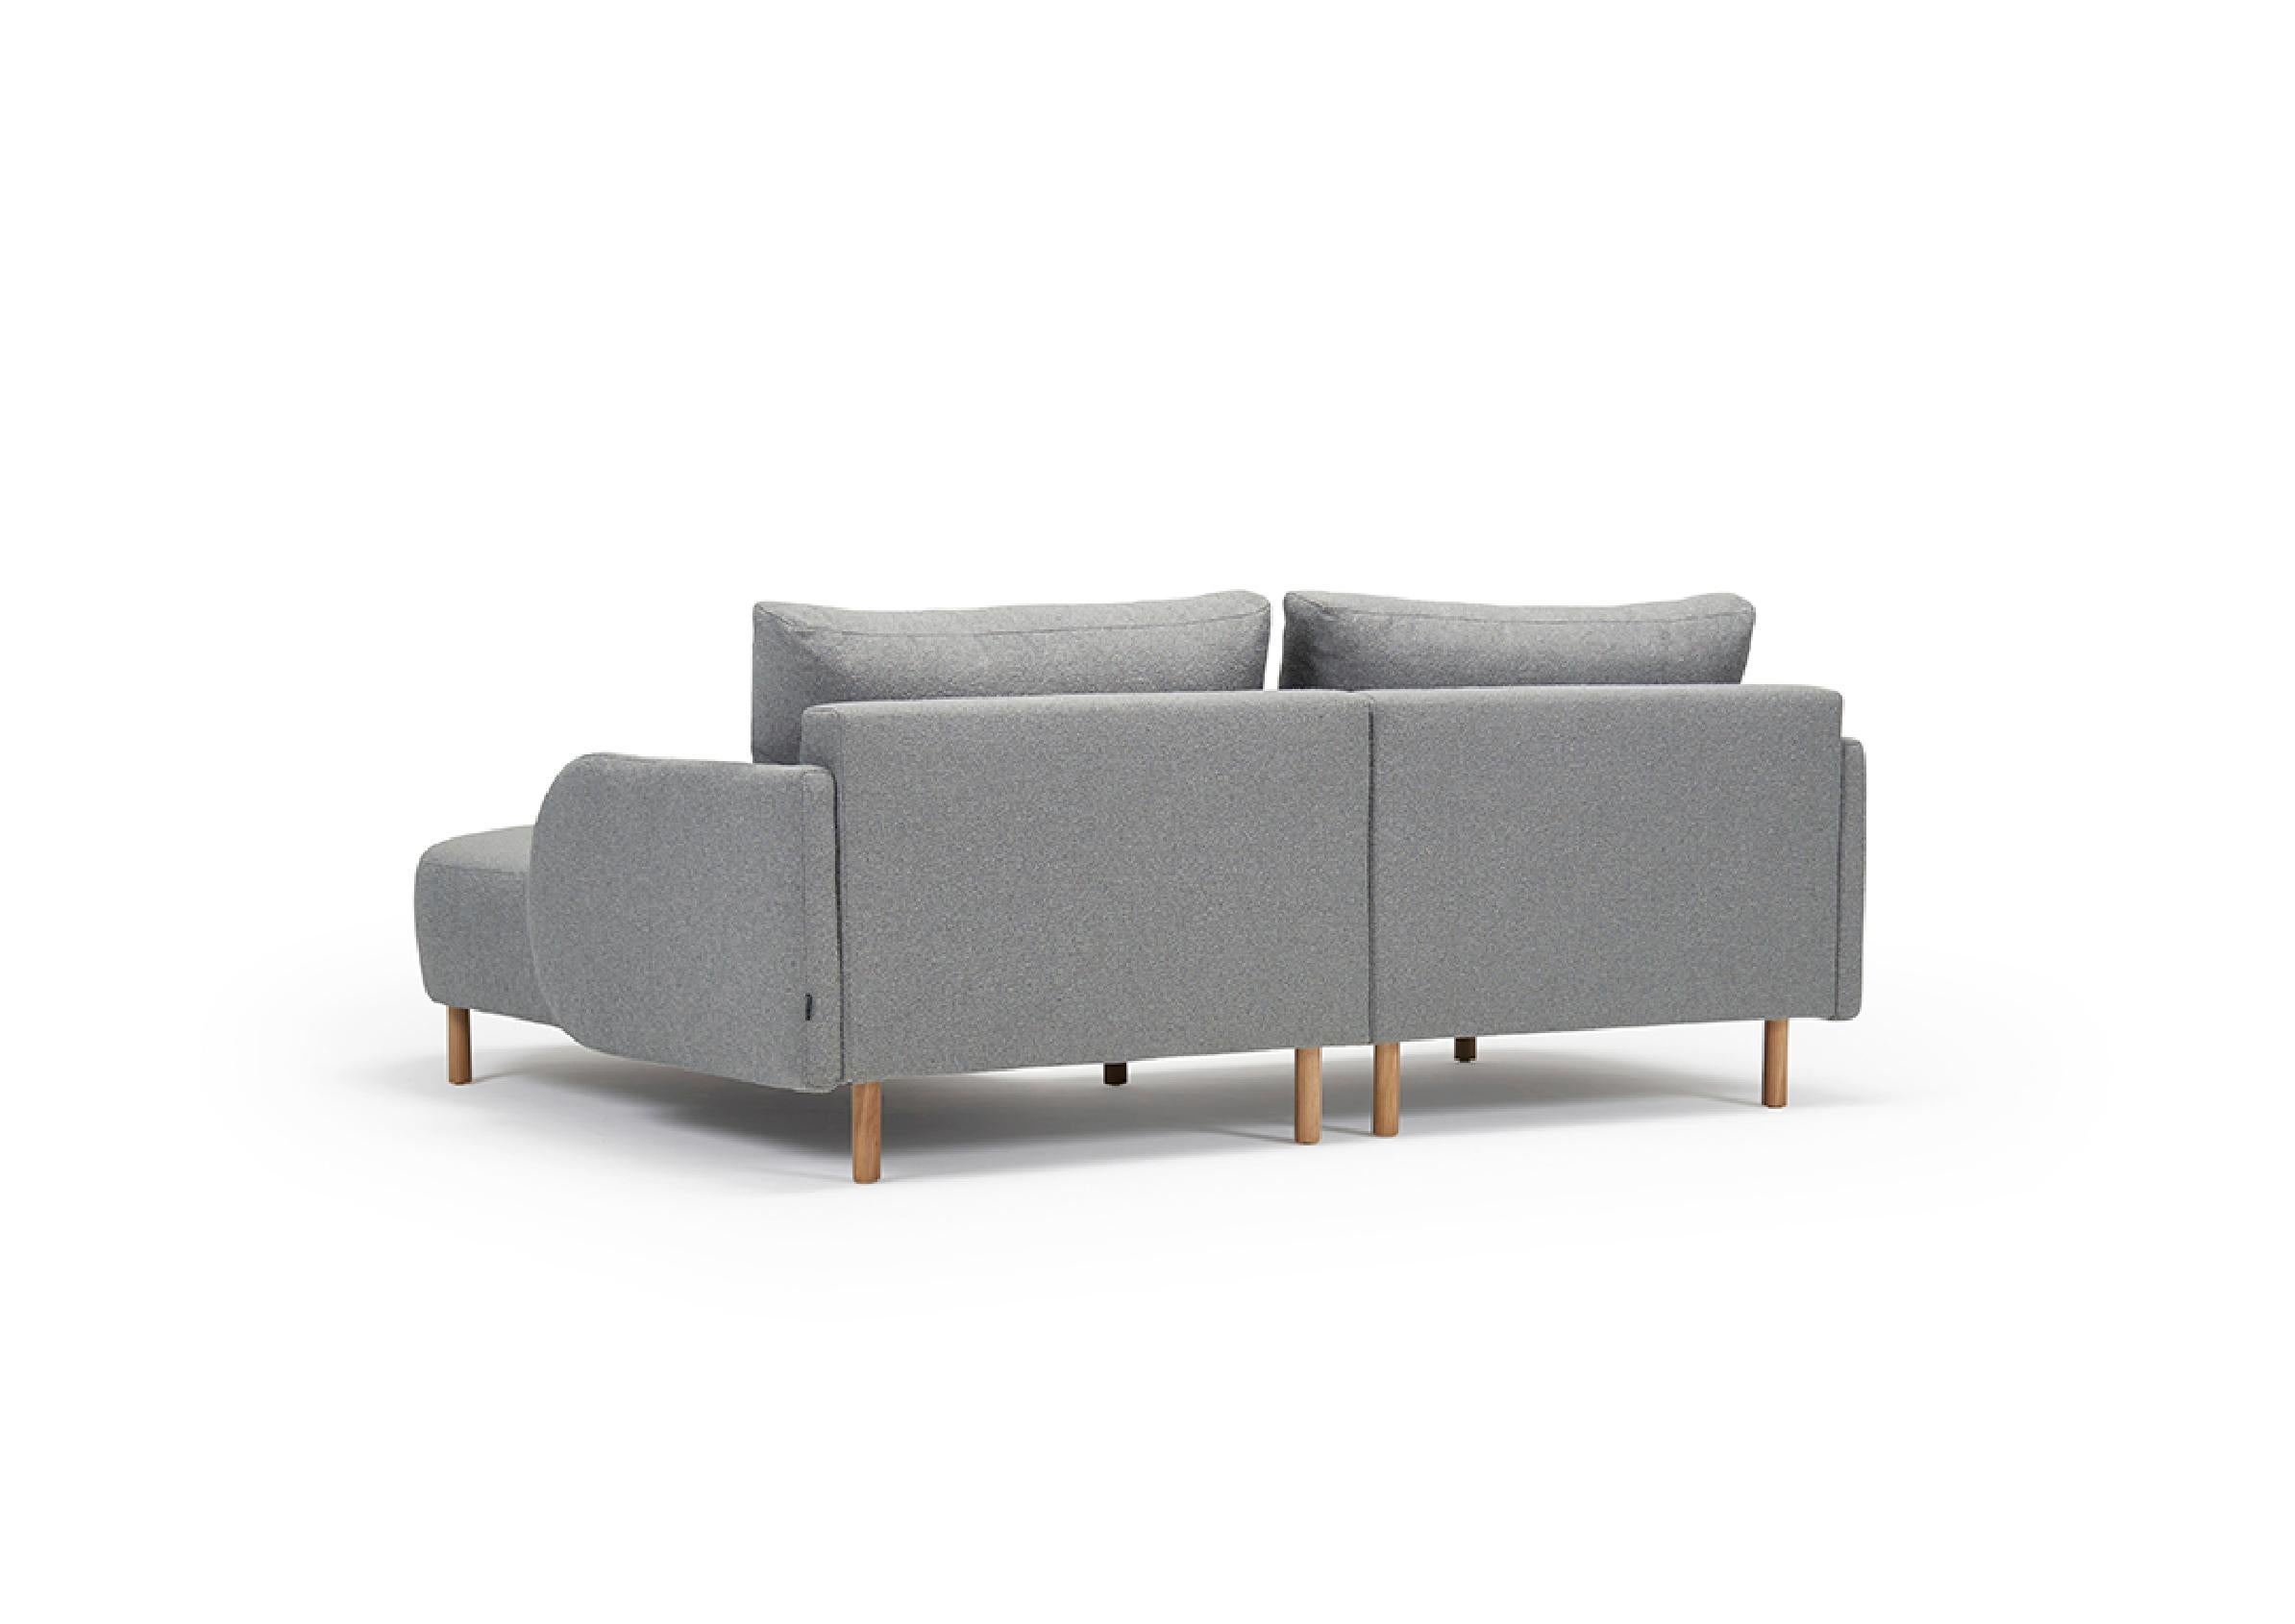 Embodying contemporary design aesthetics, the Paleta Chaise+1 Sofa combines clean lines and gentle forms. As an OEM product, it offers black metal or oak lacquered legs along with a wide selection of fabric or wool finishes for the upholstery,